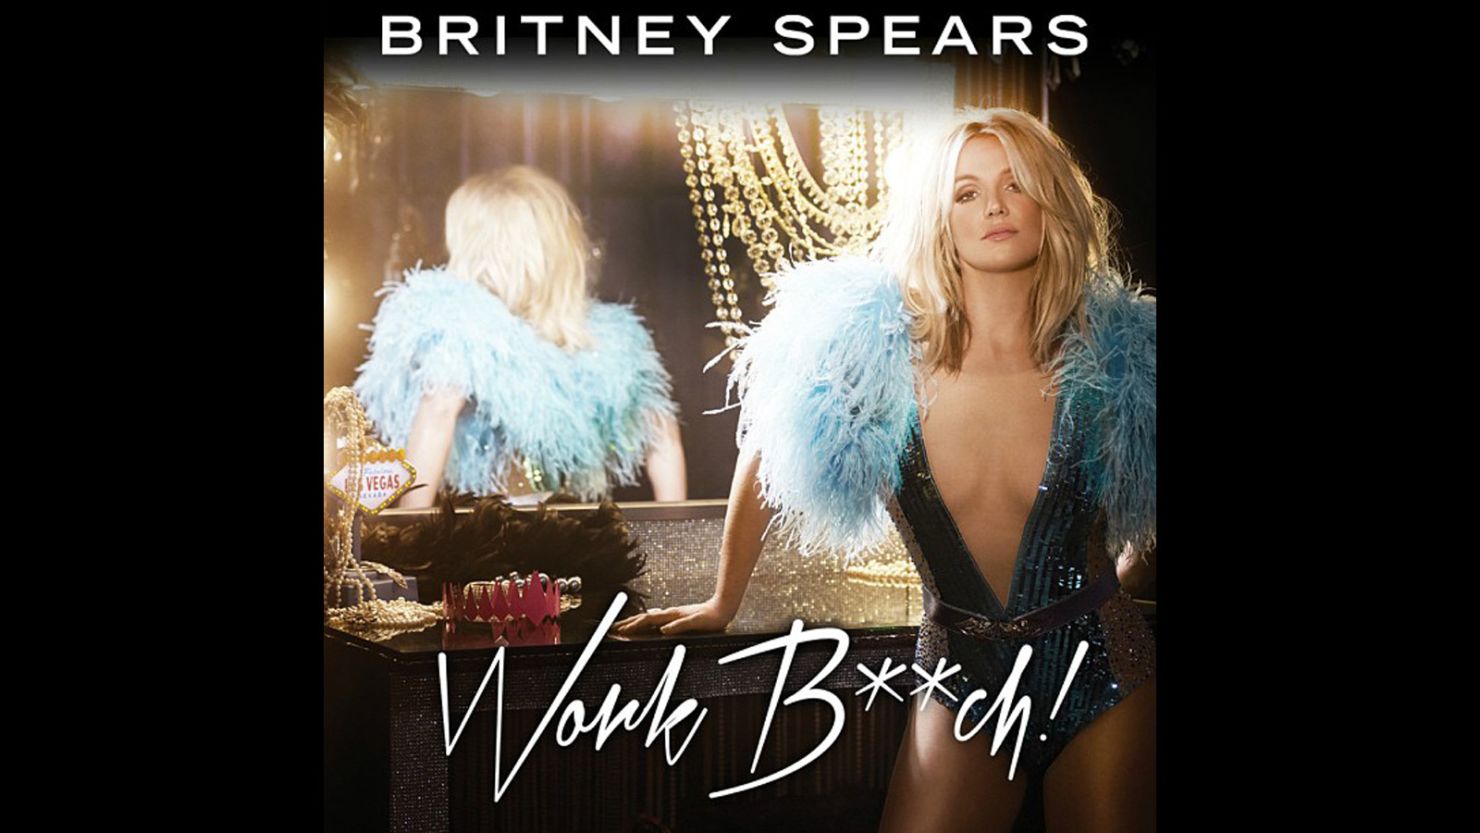 Britney Spears recently released a new single after the track was leaked on the Internet.